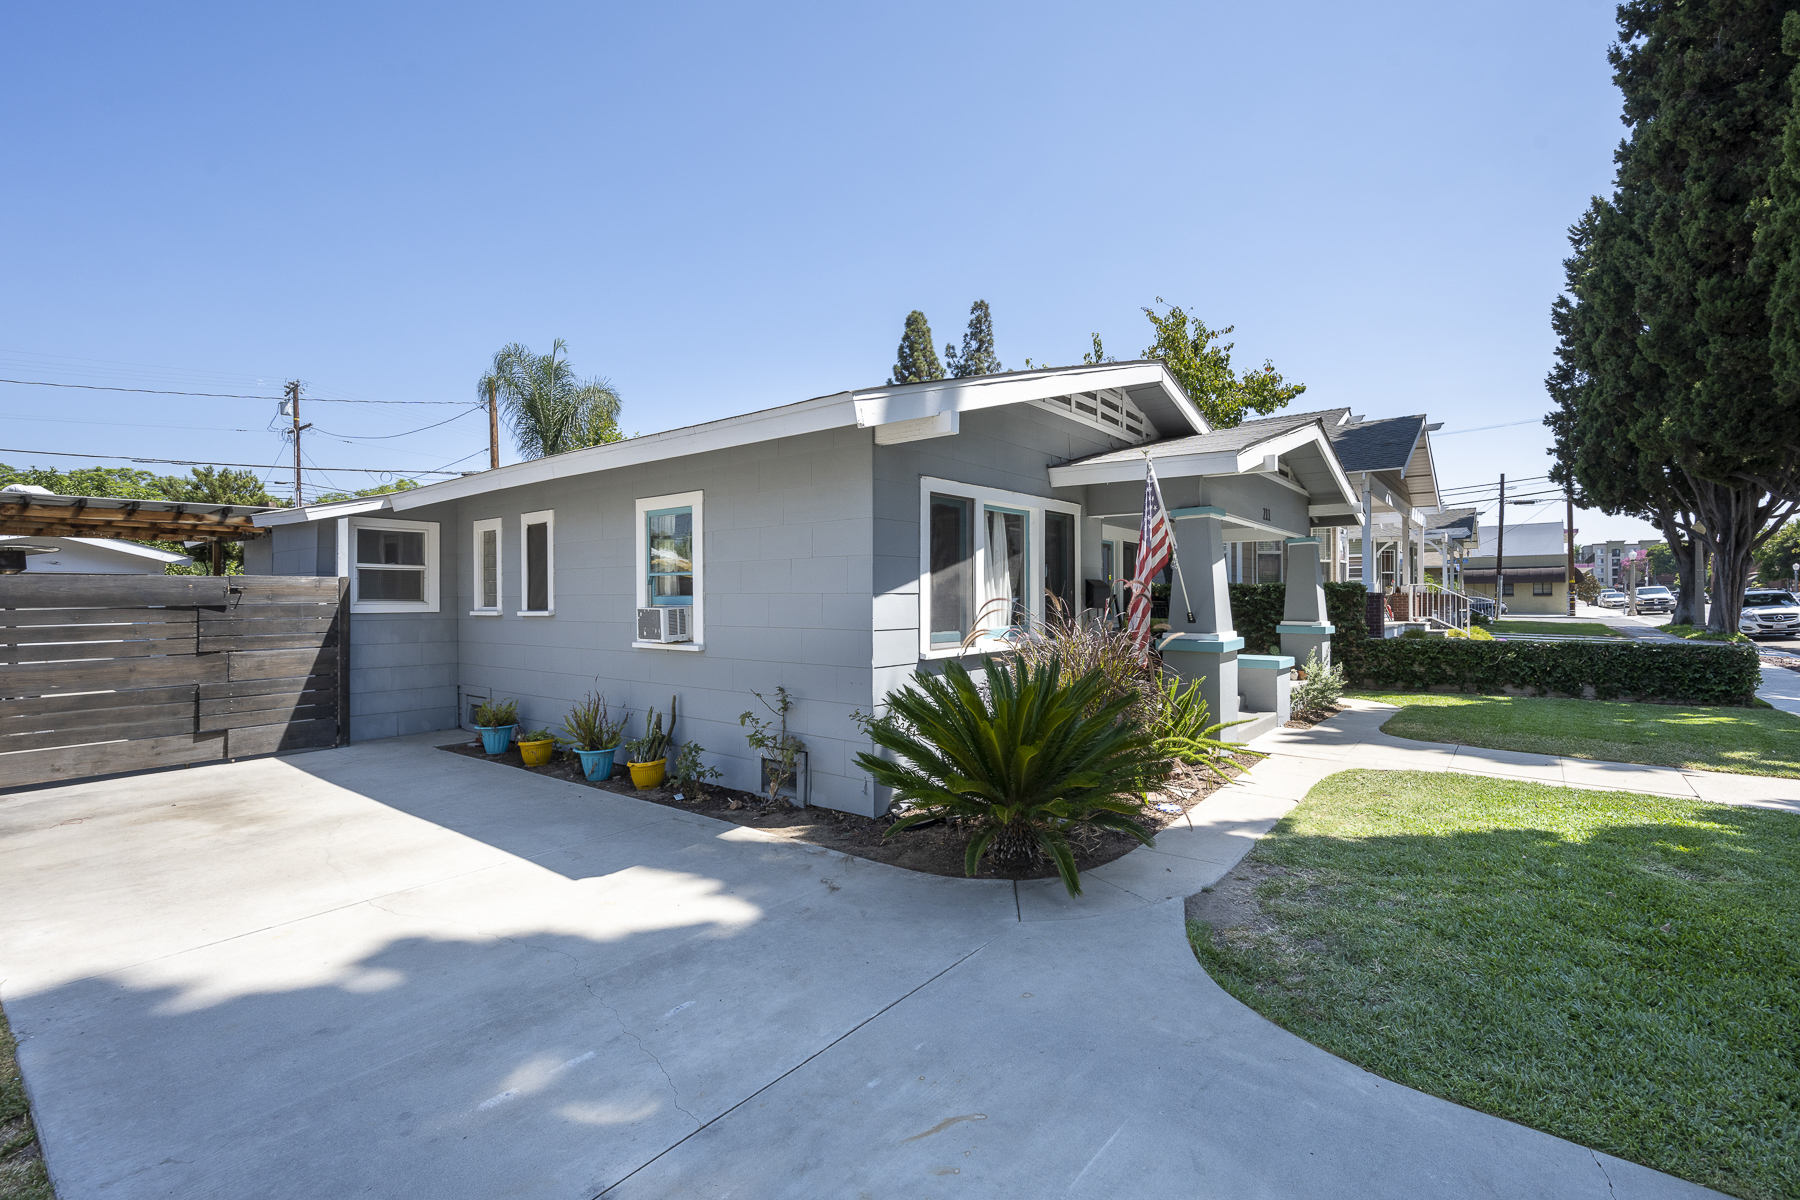 211 W. Whiting Ave, Fullerton, CA 92832